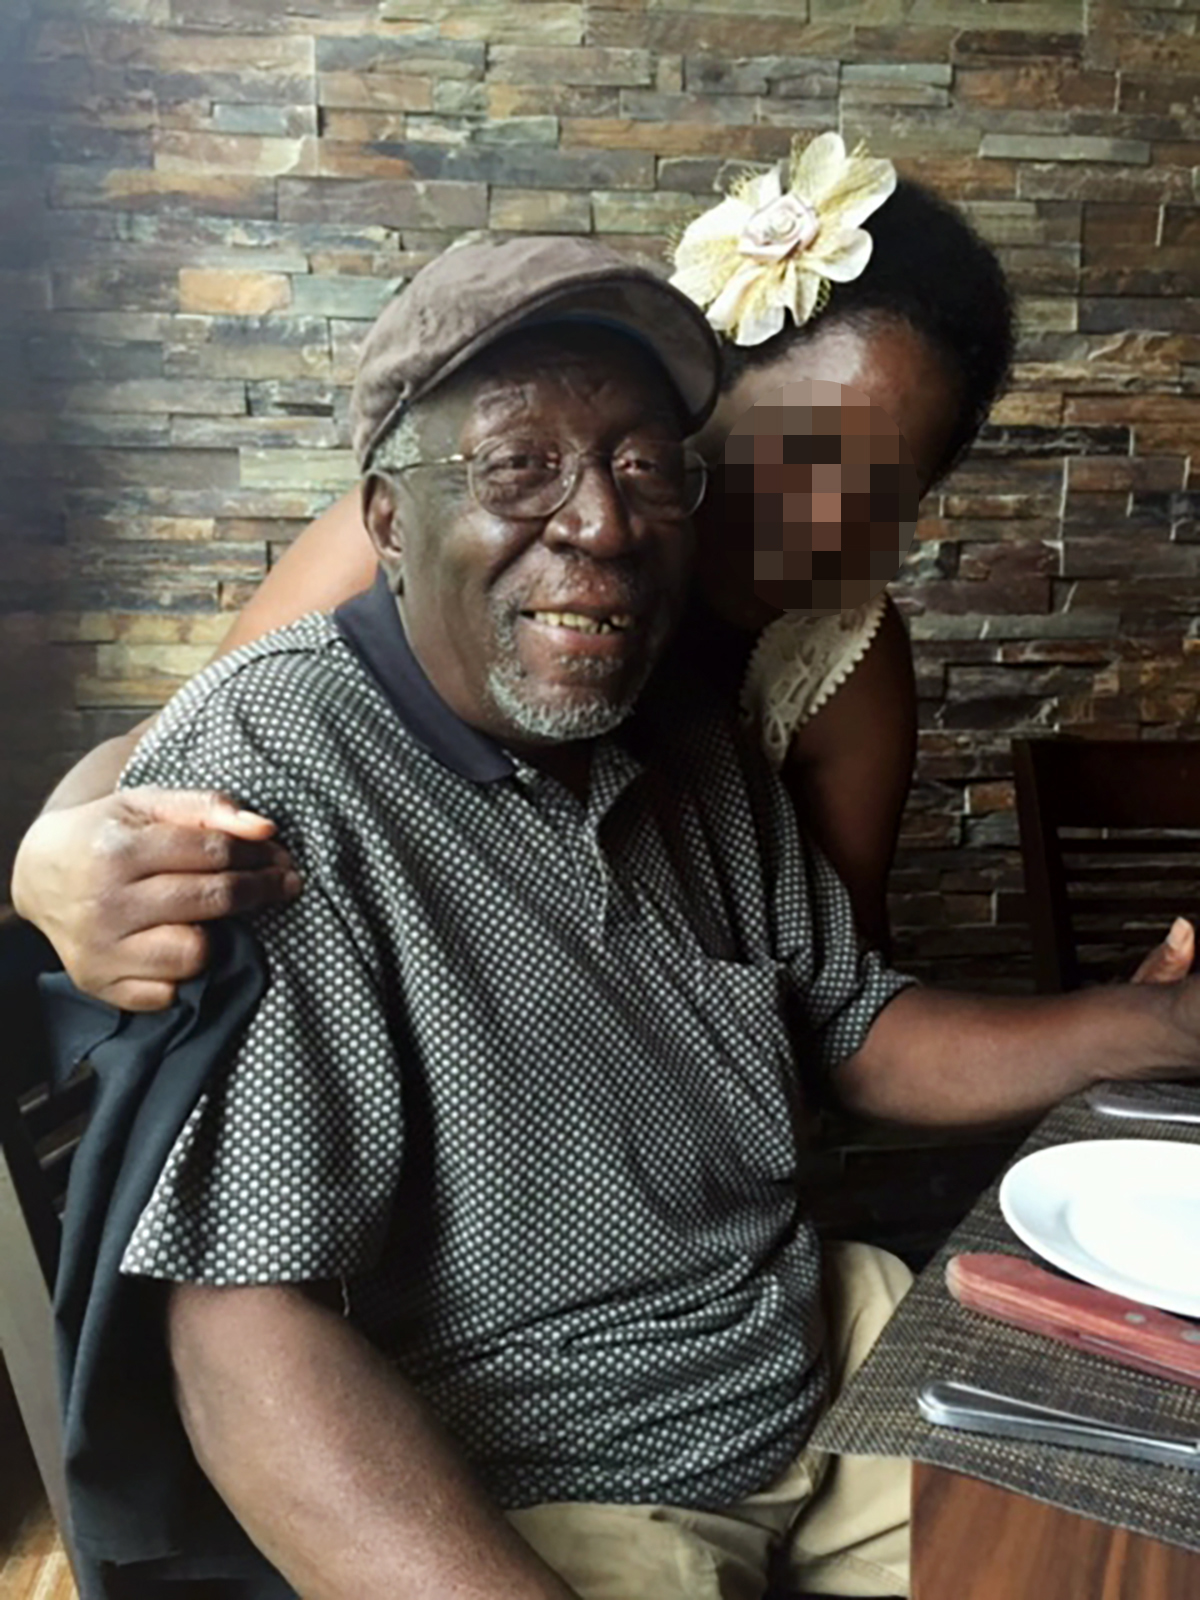 PHOTO: Robert Godwin Sr., who was shot dead in Cleveland, April 16, 2017, is seen in this undated photo.